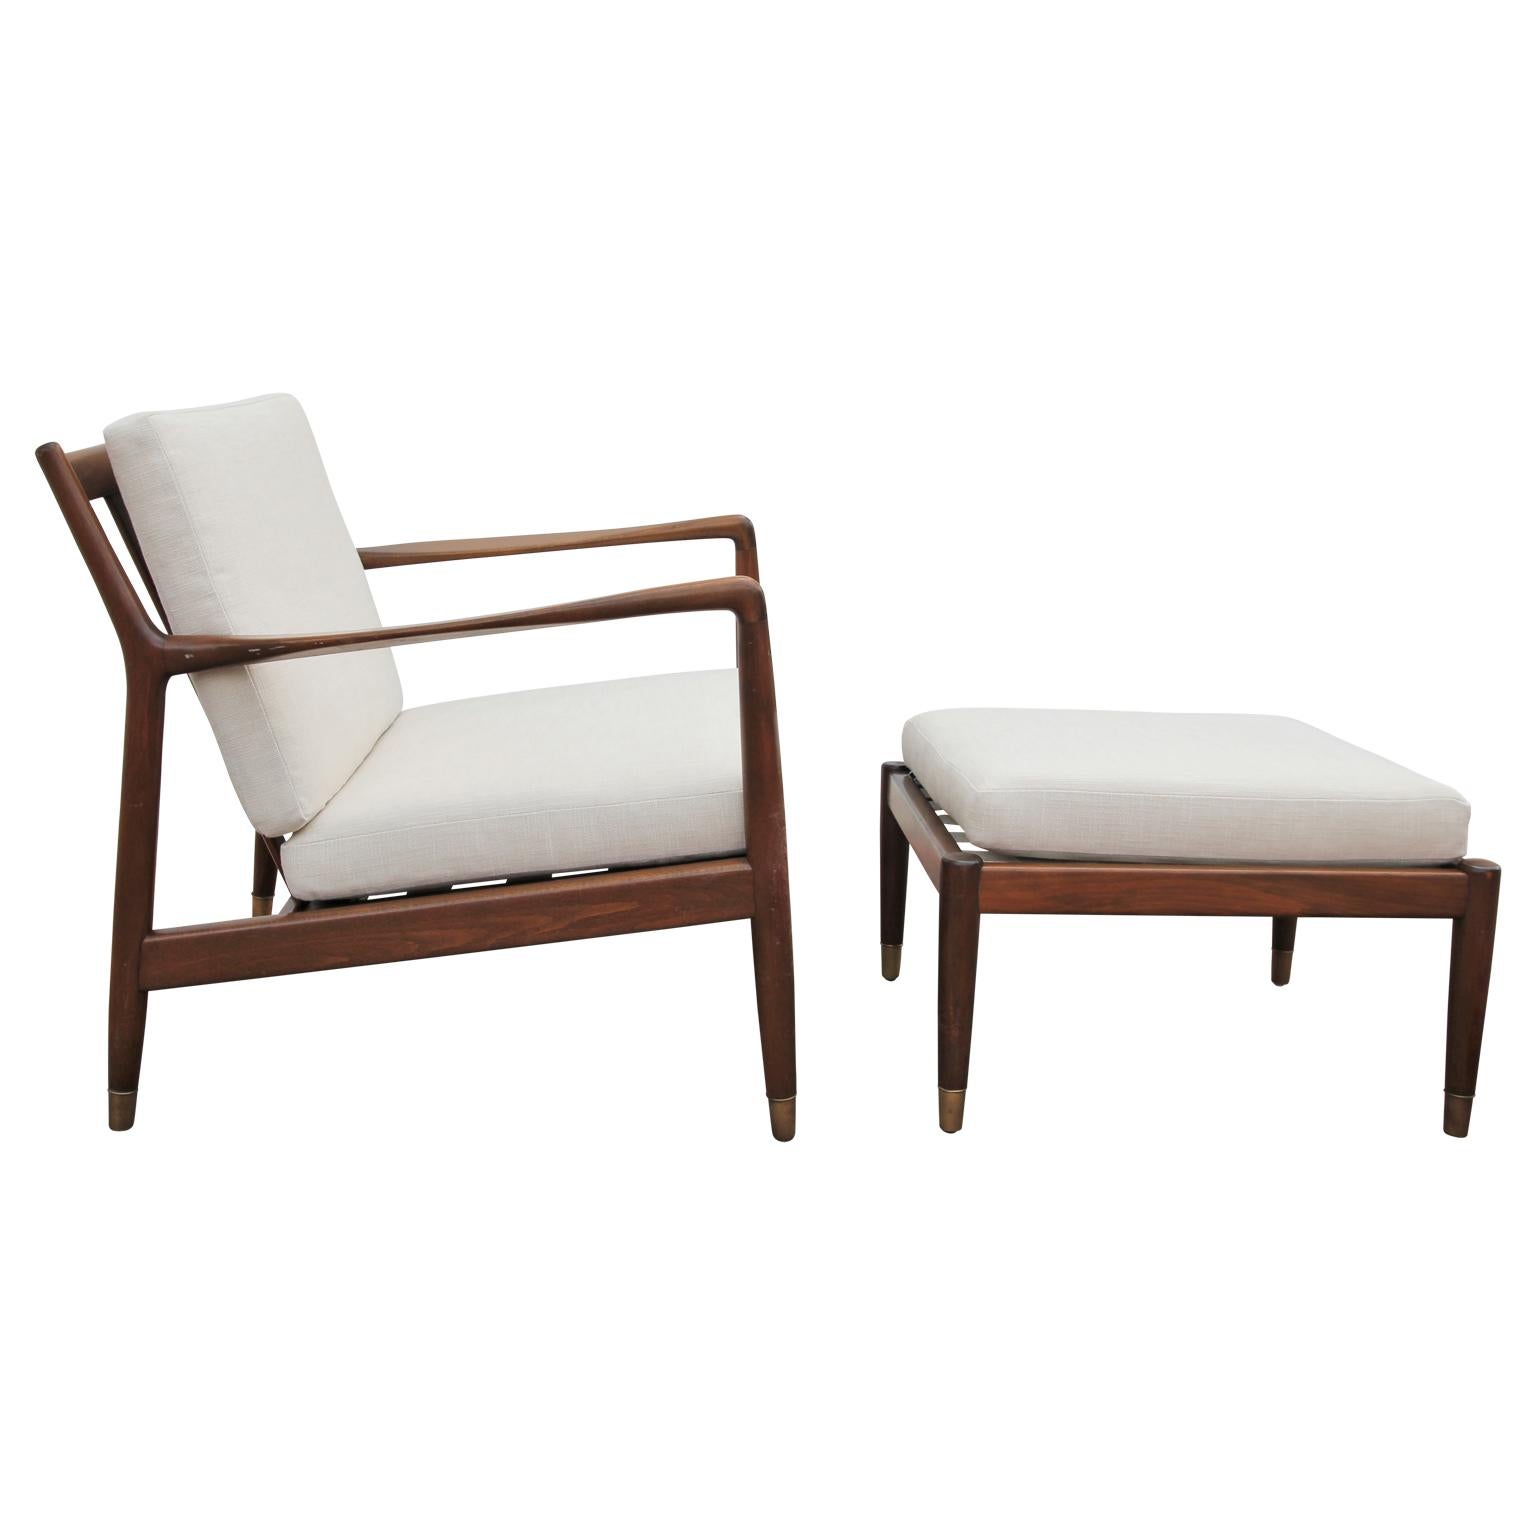 Folke Ohlsson Model 75-C walnut color Danish modern lounge chair for DUX
New indoor outdoor stainproof fabric from Kravet.
Chair dimensions: H 28 in. x W 27 in. x D 26 in. 
Seat height: 15 in. 
Arm height: 23 in.
Ottoman dimensions: H 15 in. x